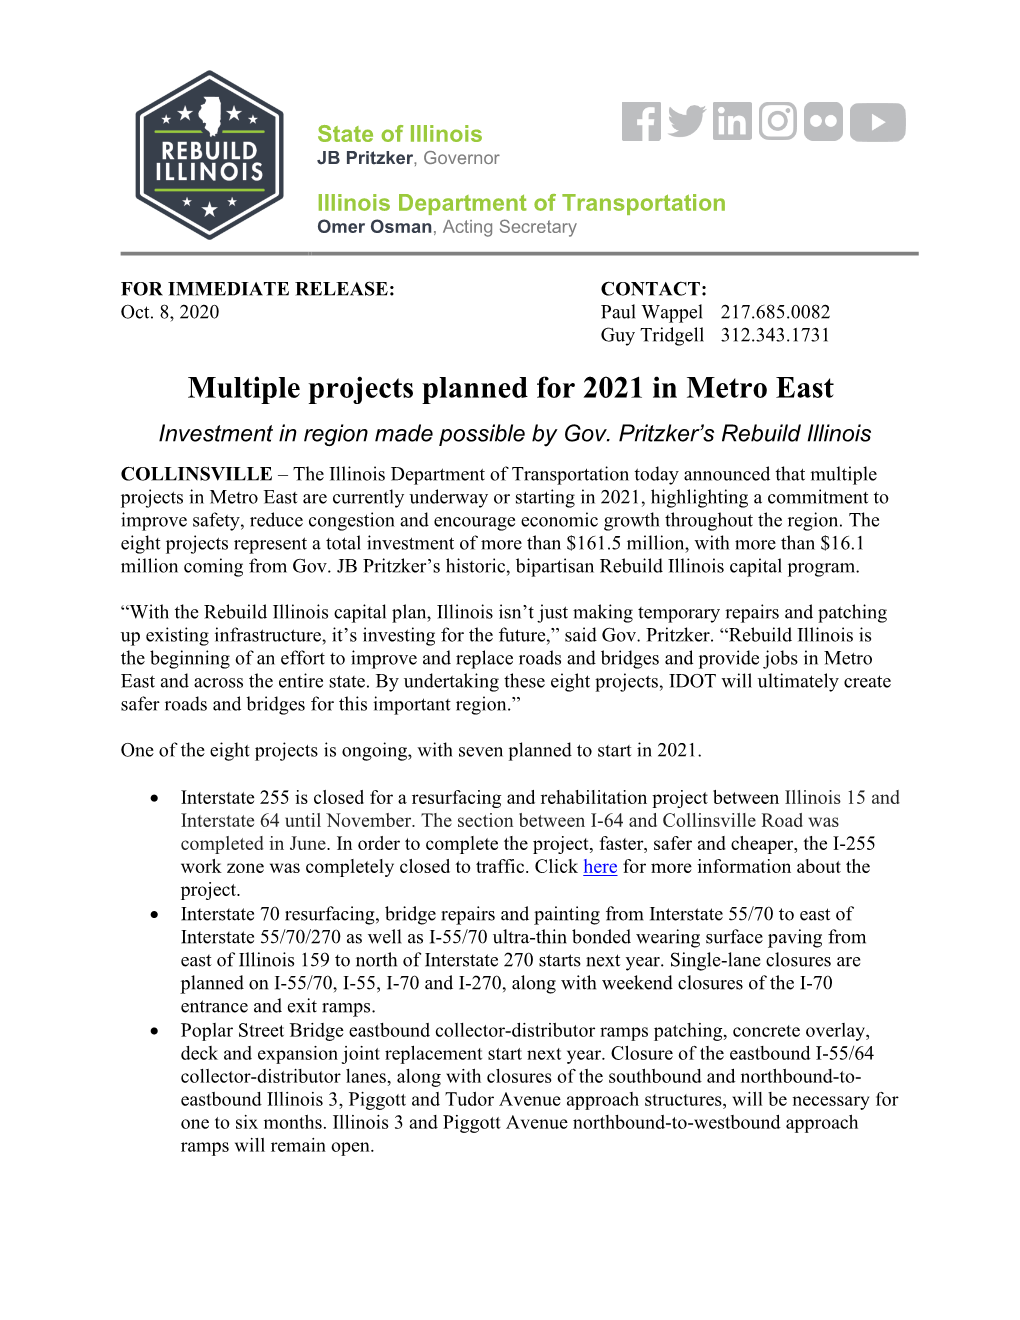 Multiple Projects Planned for 2021 in Metro East